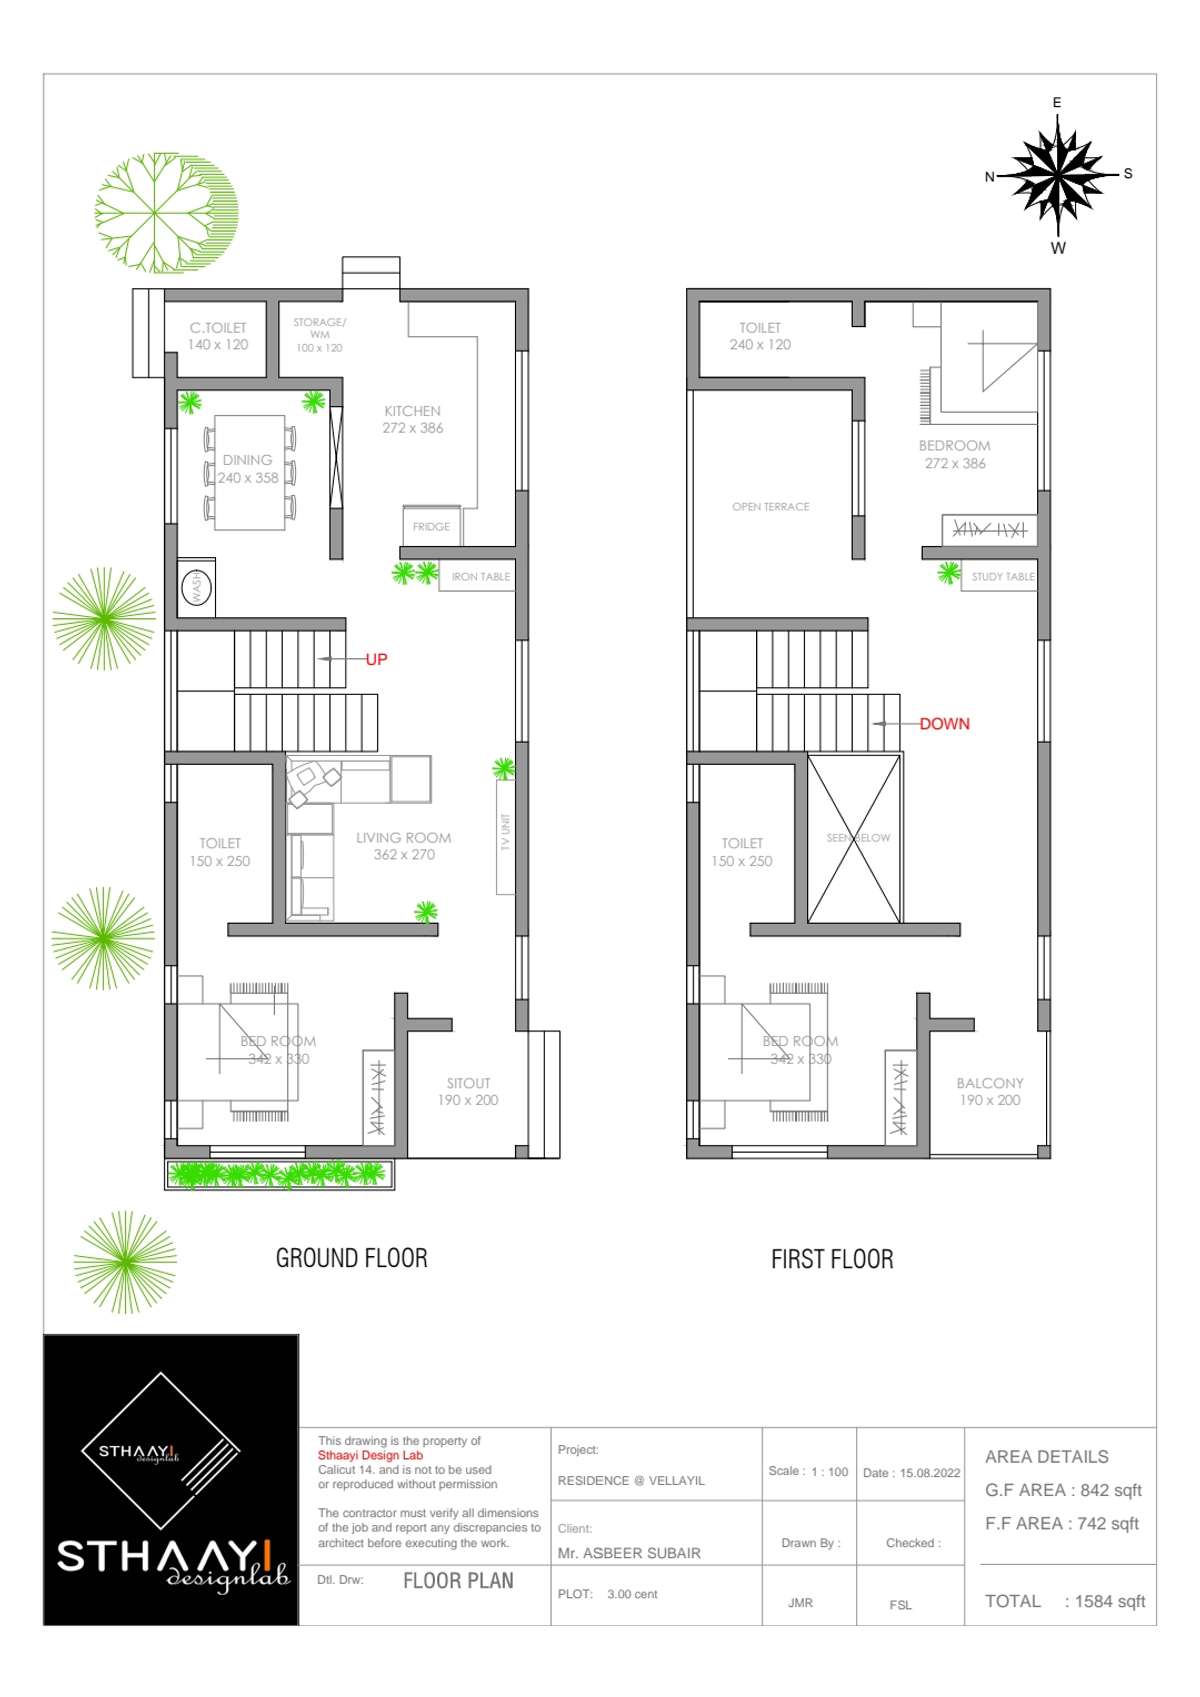 3Cent 3BHK HOME PLAN 
area : 1584 sq.ft
3 BEDROOM 3ATTACHED
SITOUT
LIVING
DINING
KITCHEN
STORAGE
C_TOILET


#sthaayi_design_lab
#FloorPlans #4bhk #3BHK #4BHKHouse #4BHKPlans #3centPlot #4centPlot #4cent